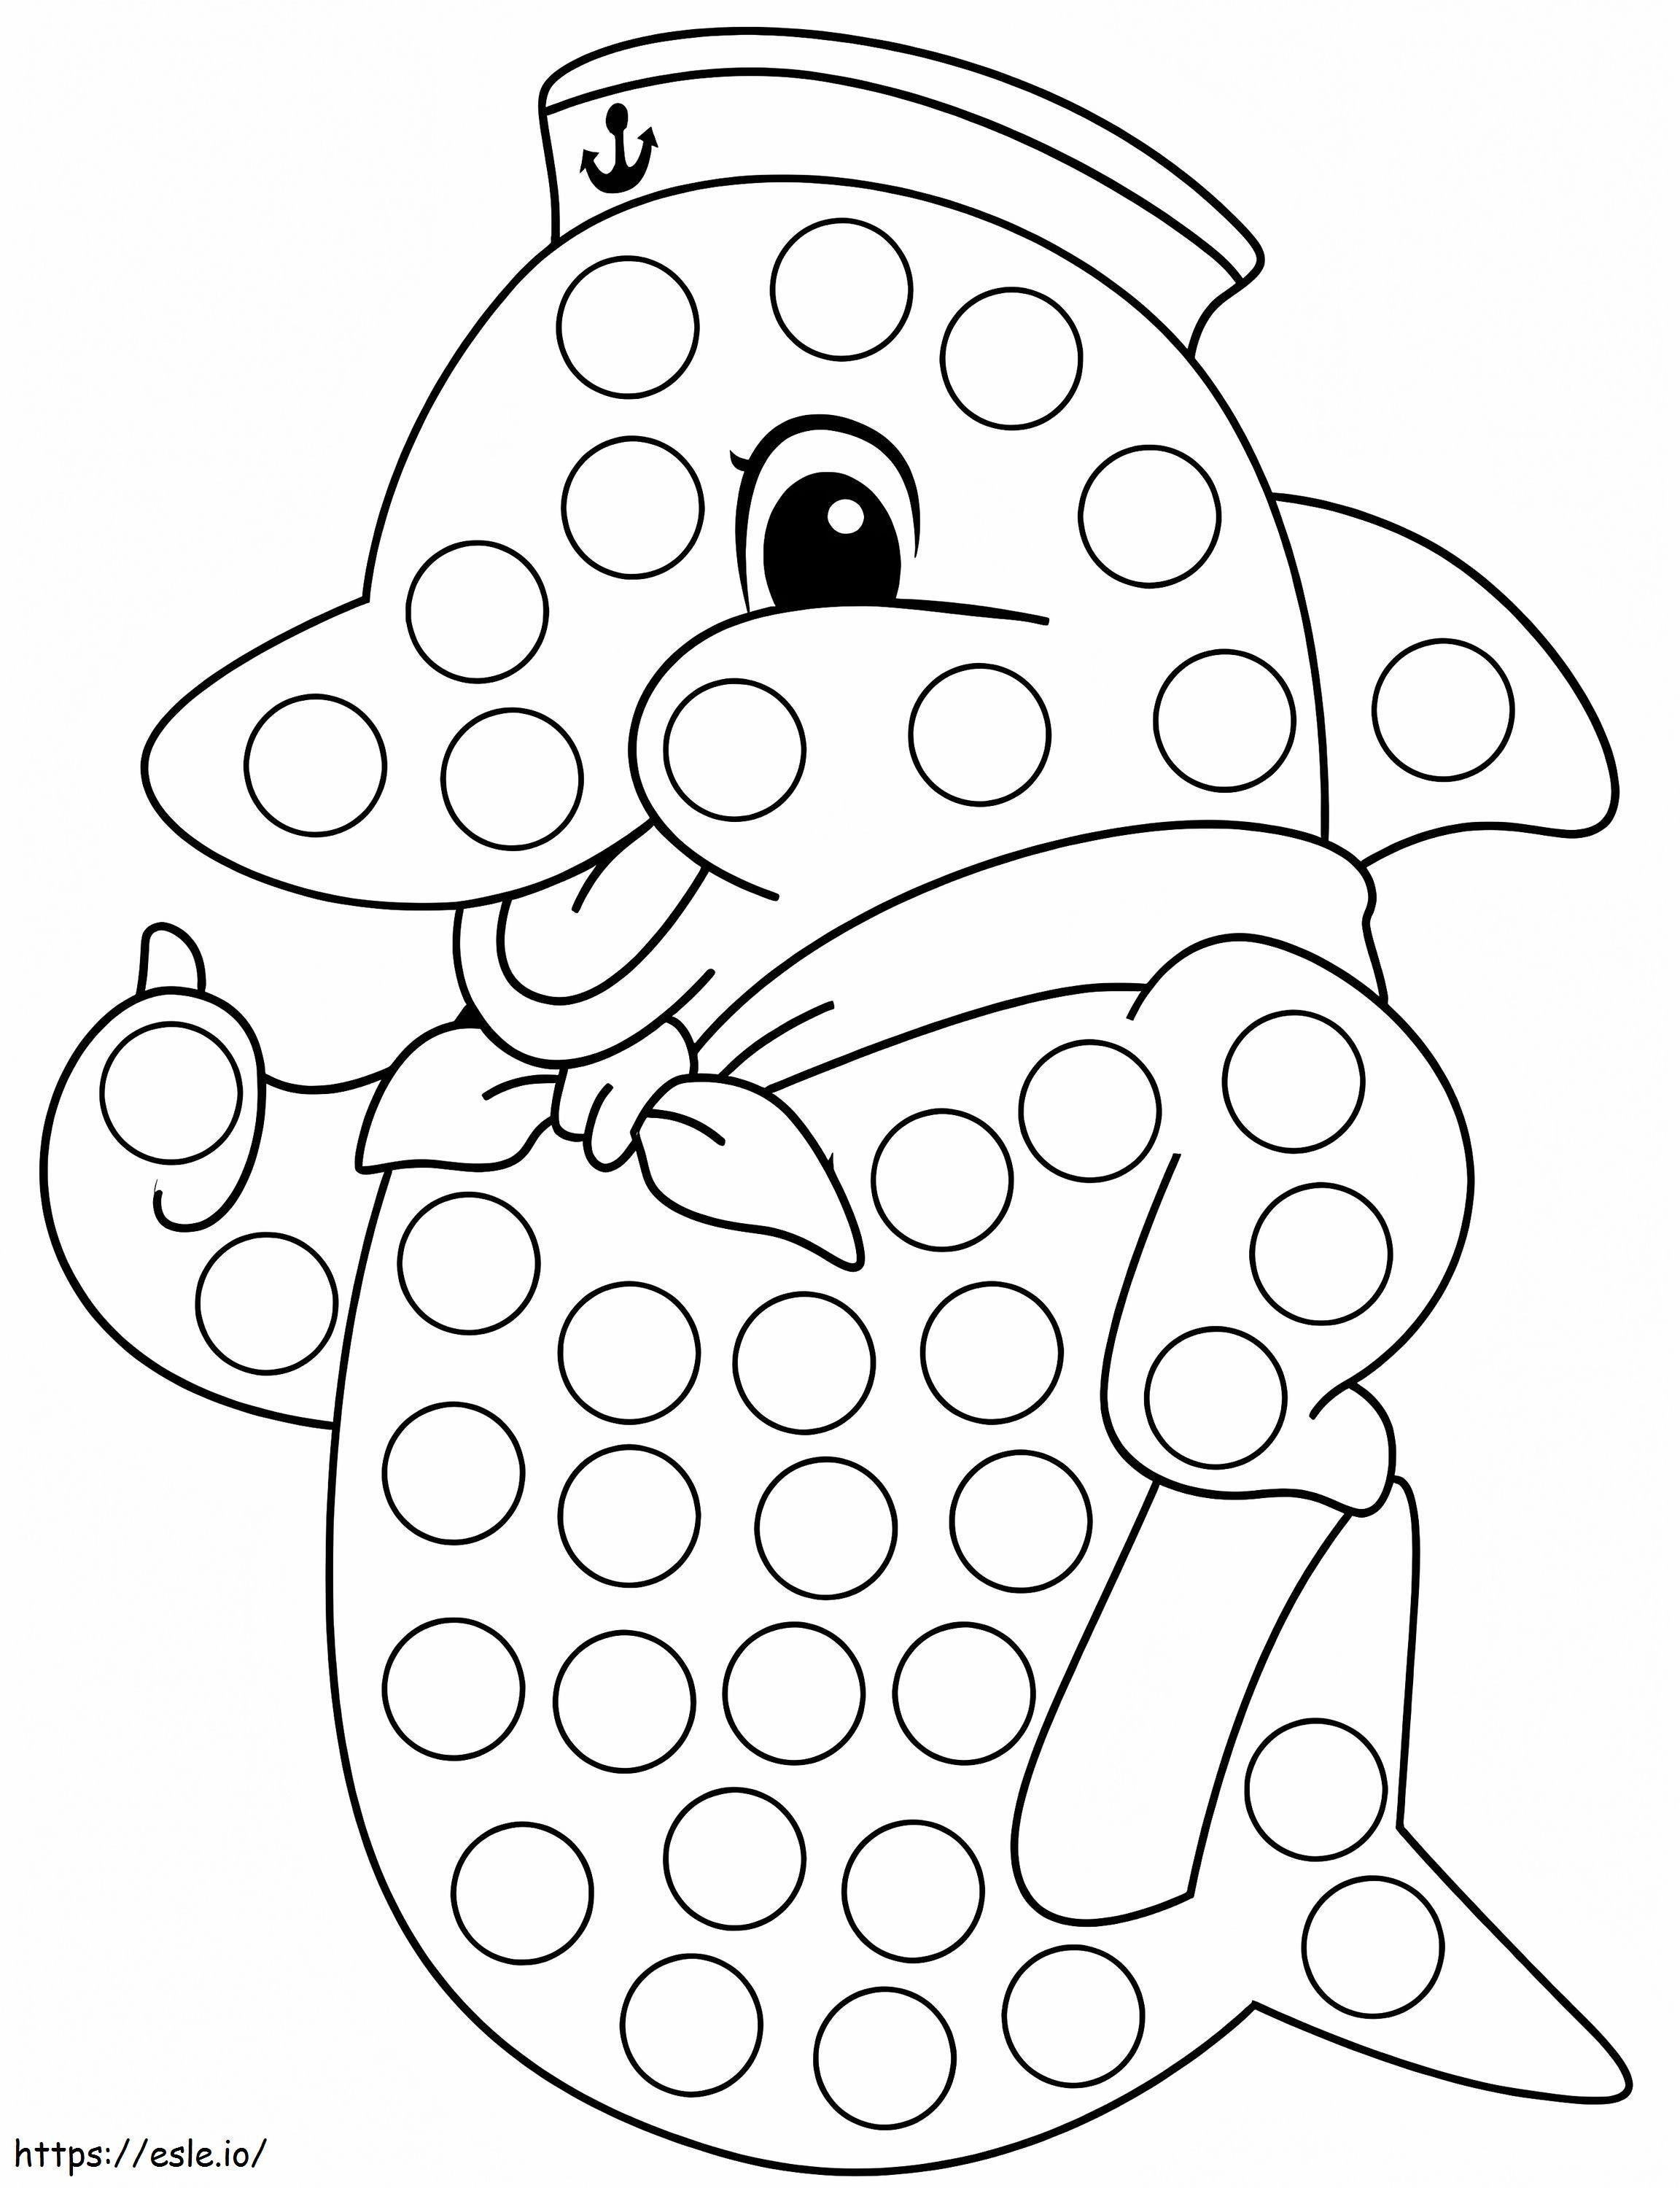 Dolphin Dot Marker coloring page